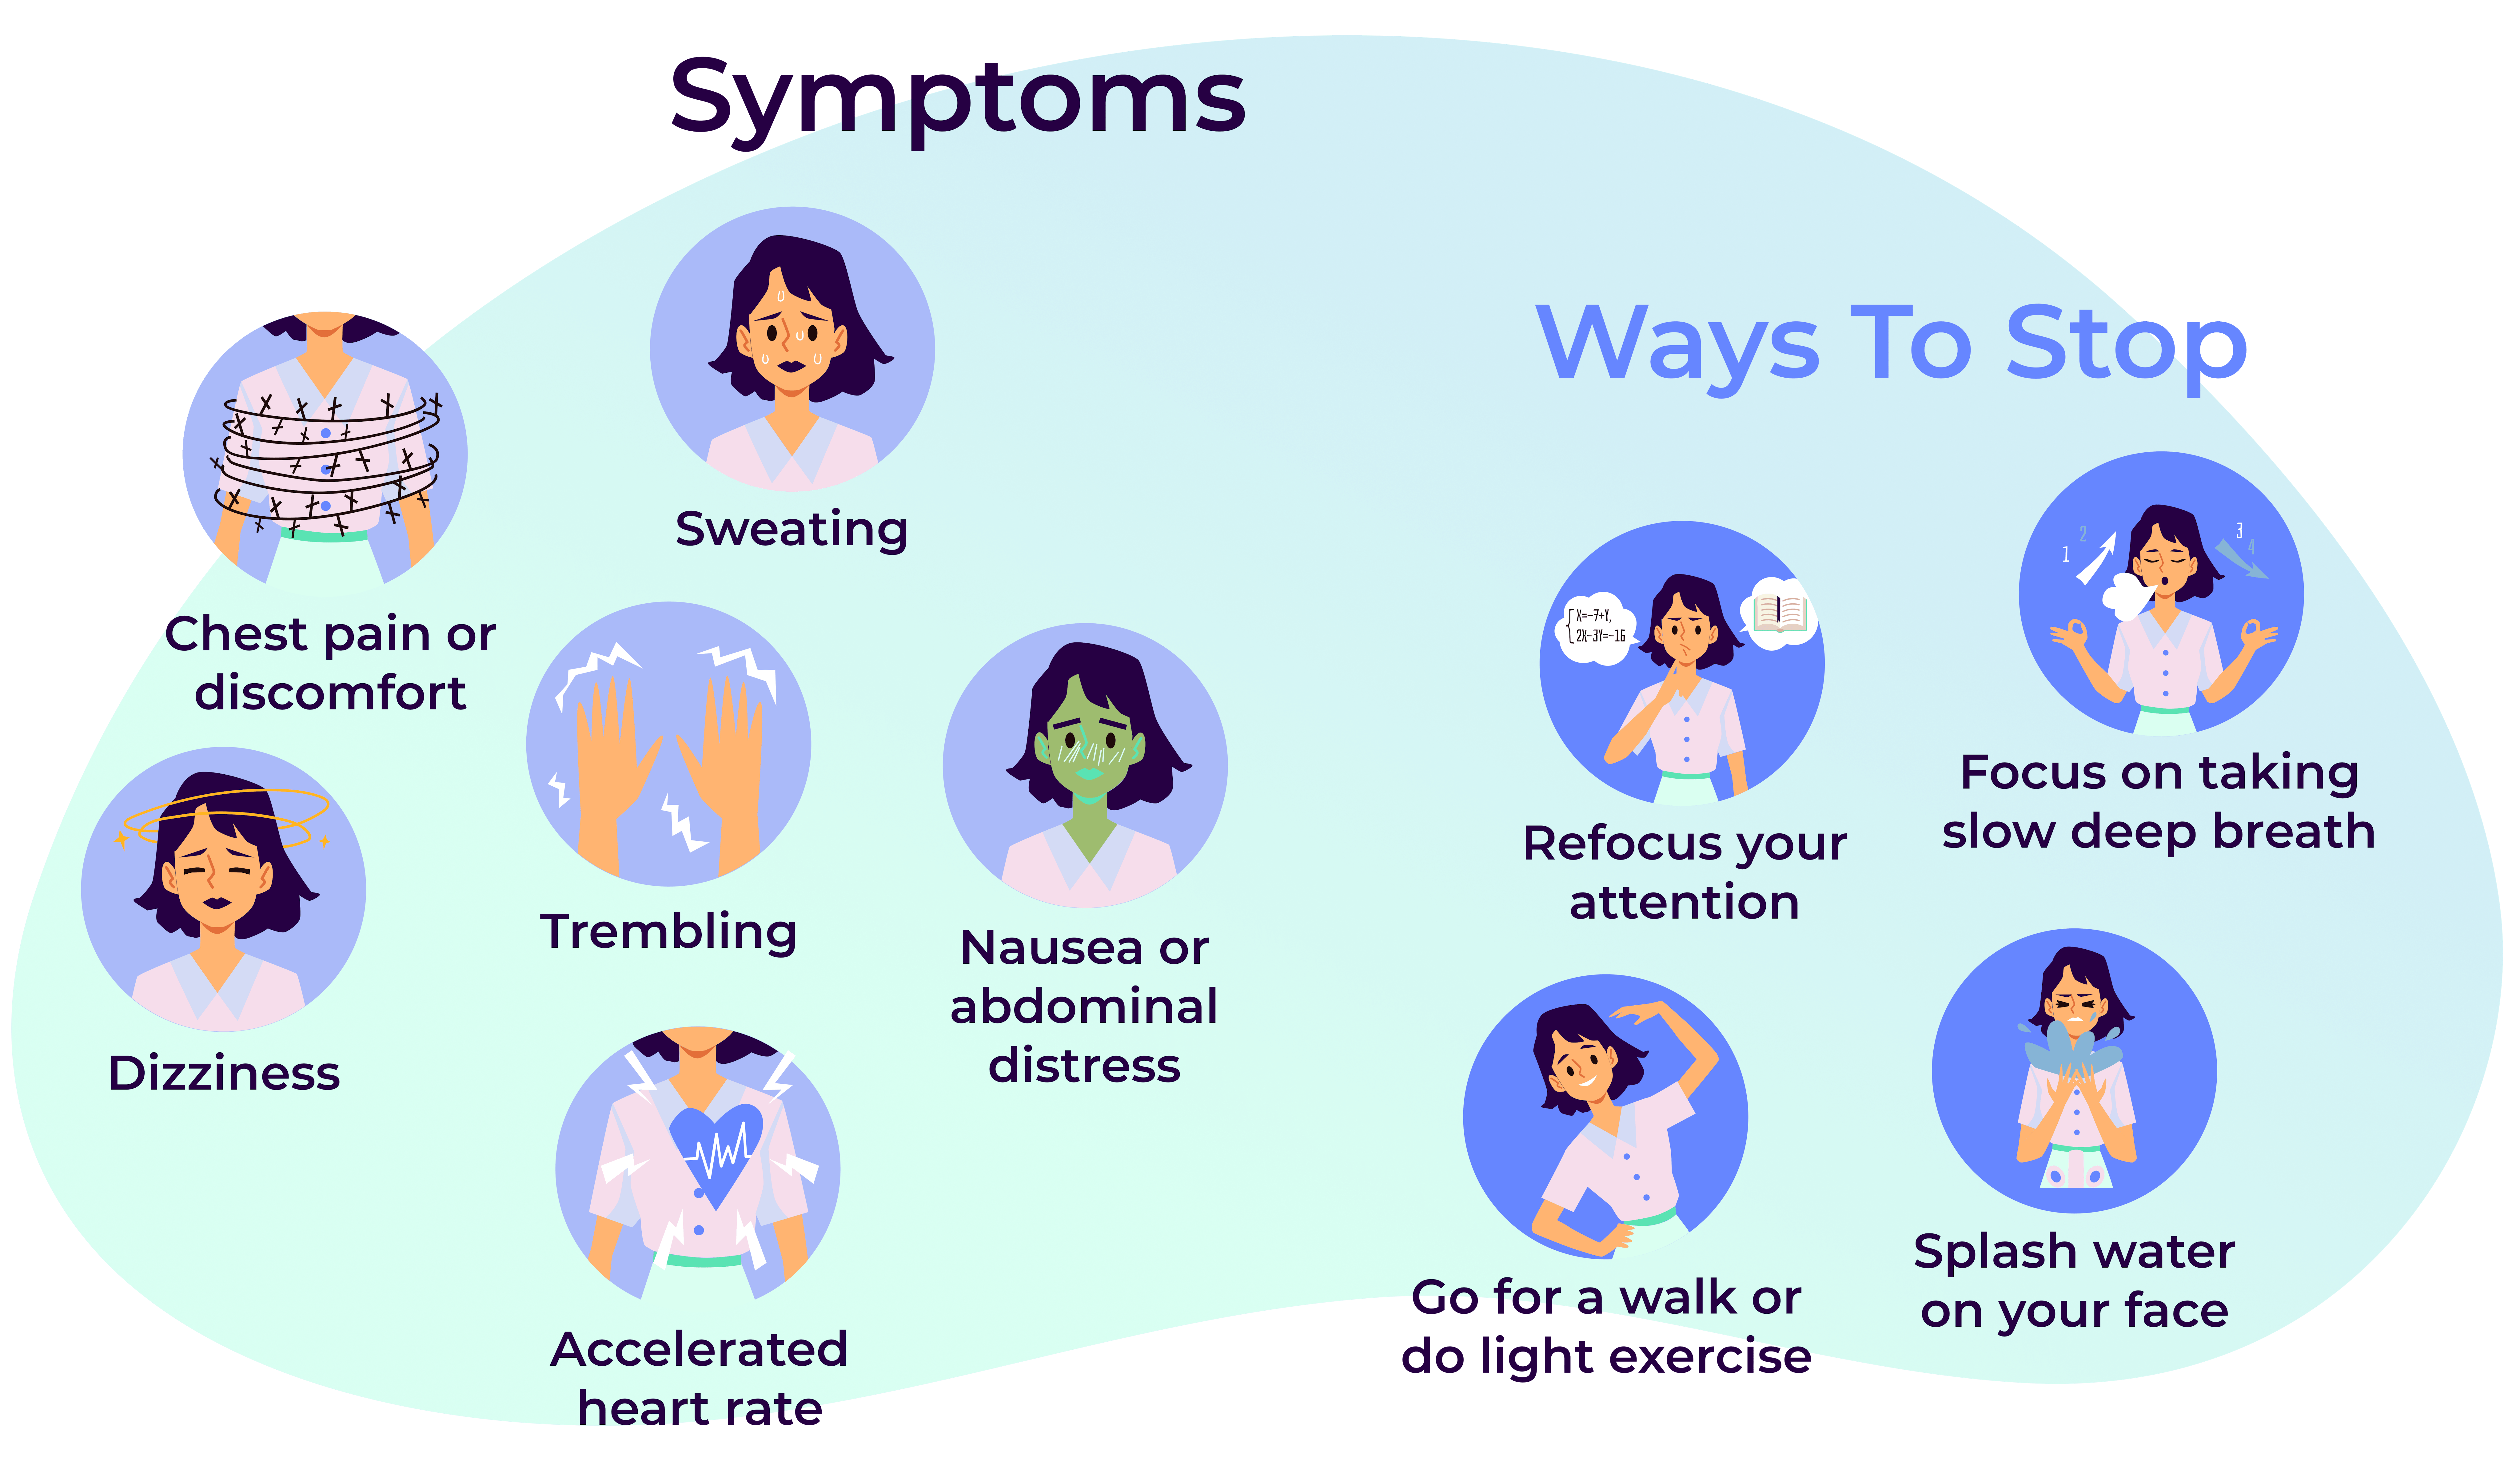 Signs and symptoms of a panic or anxiety attack and ways to stop them.